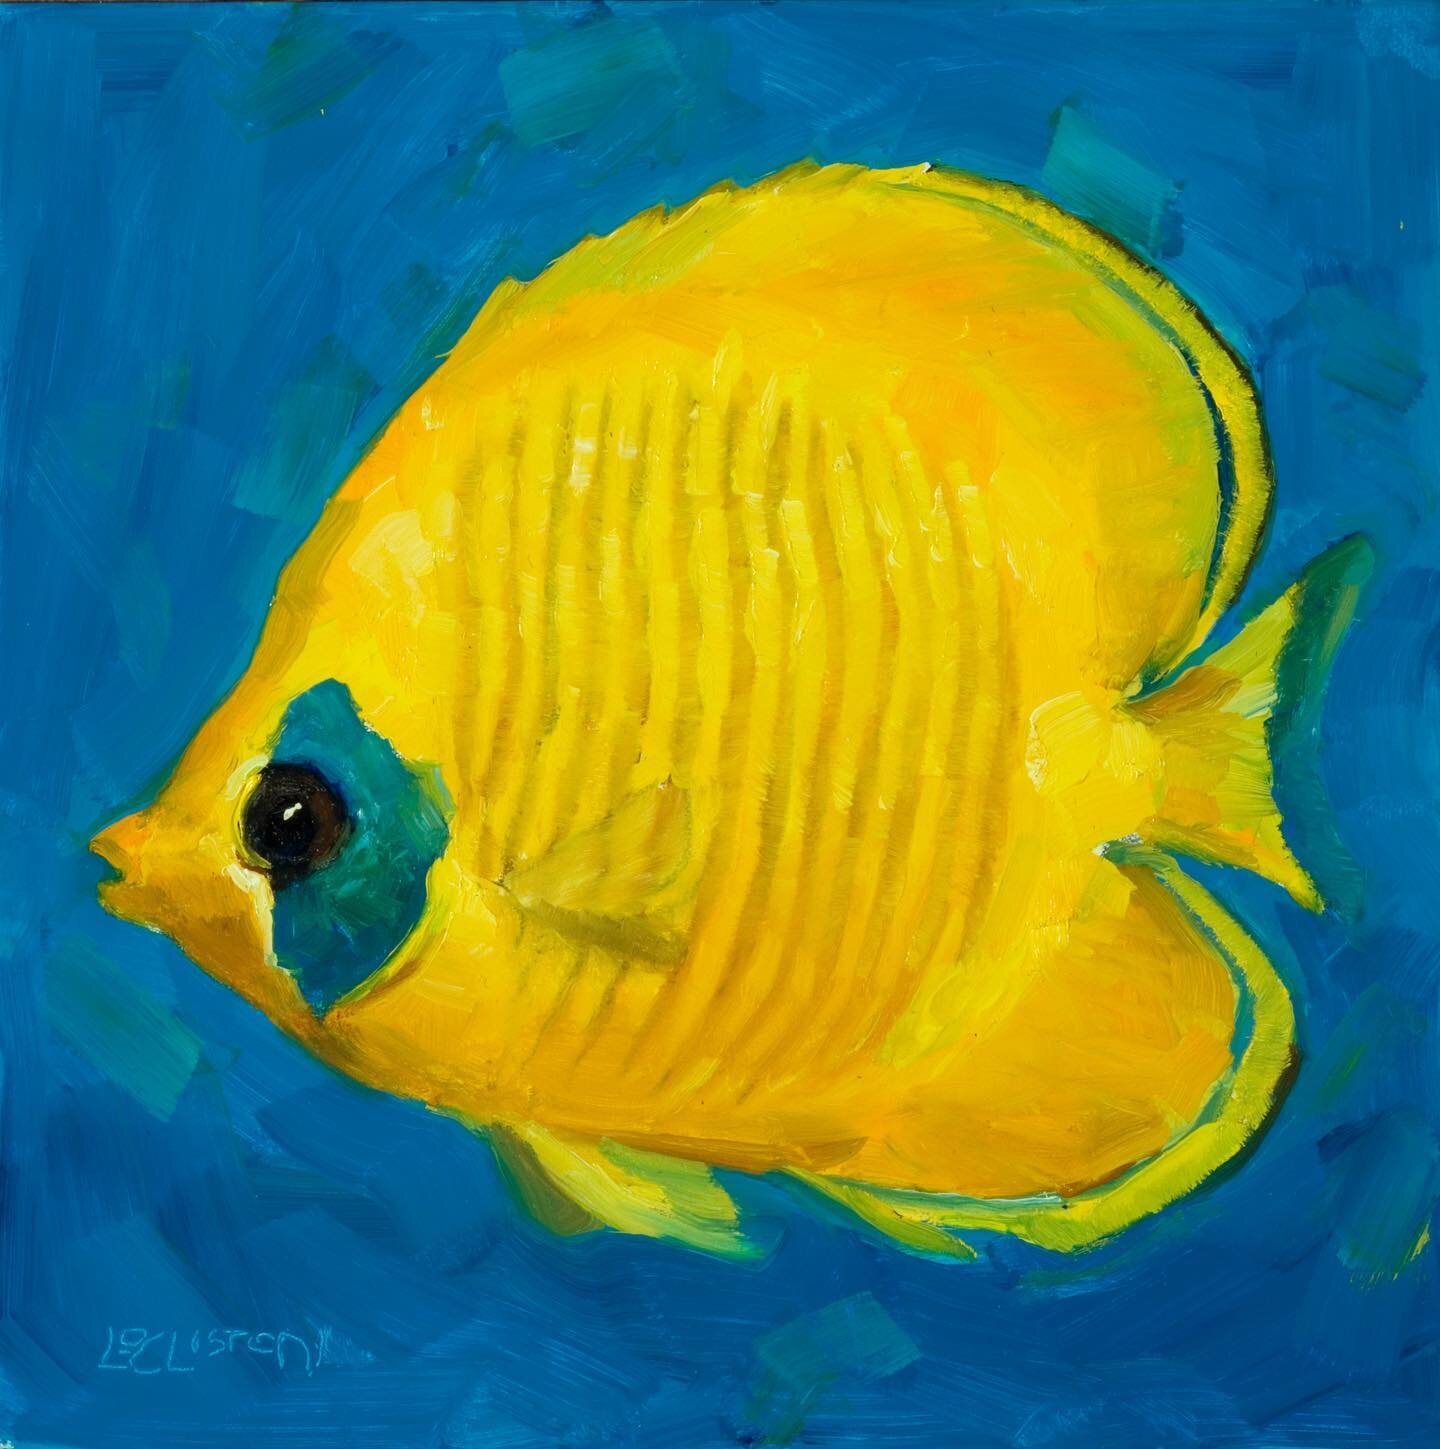 And now for something completely different. Butterfly fish 6&rdquo;x6&rdquo; oil on panel: Available, link in bio
Did this back in 2019 just to try something I&rsquo;d never painted before. #butterflyfish #supportlivingartists #buyartonline